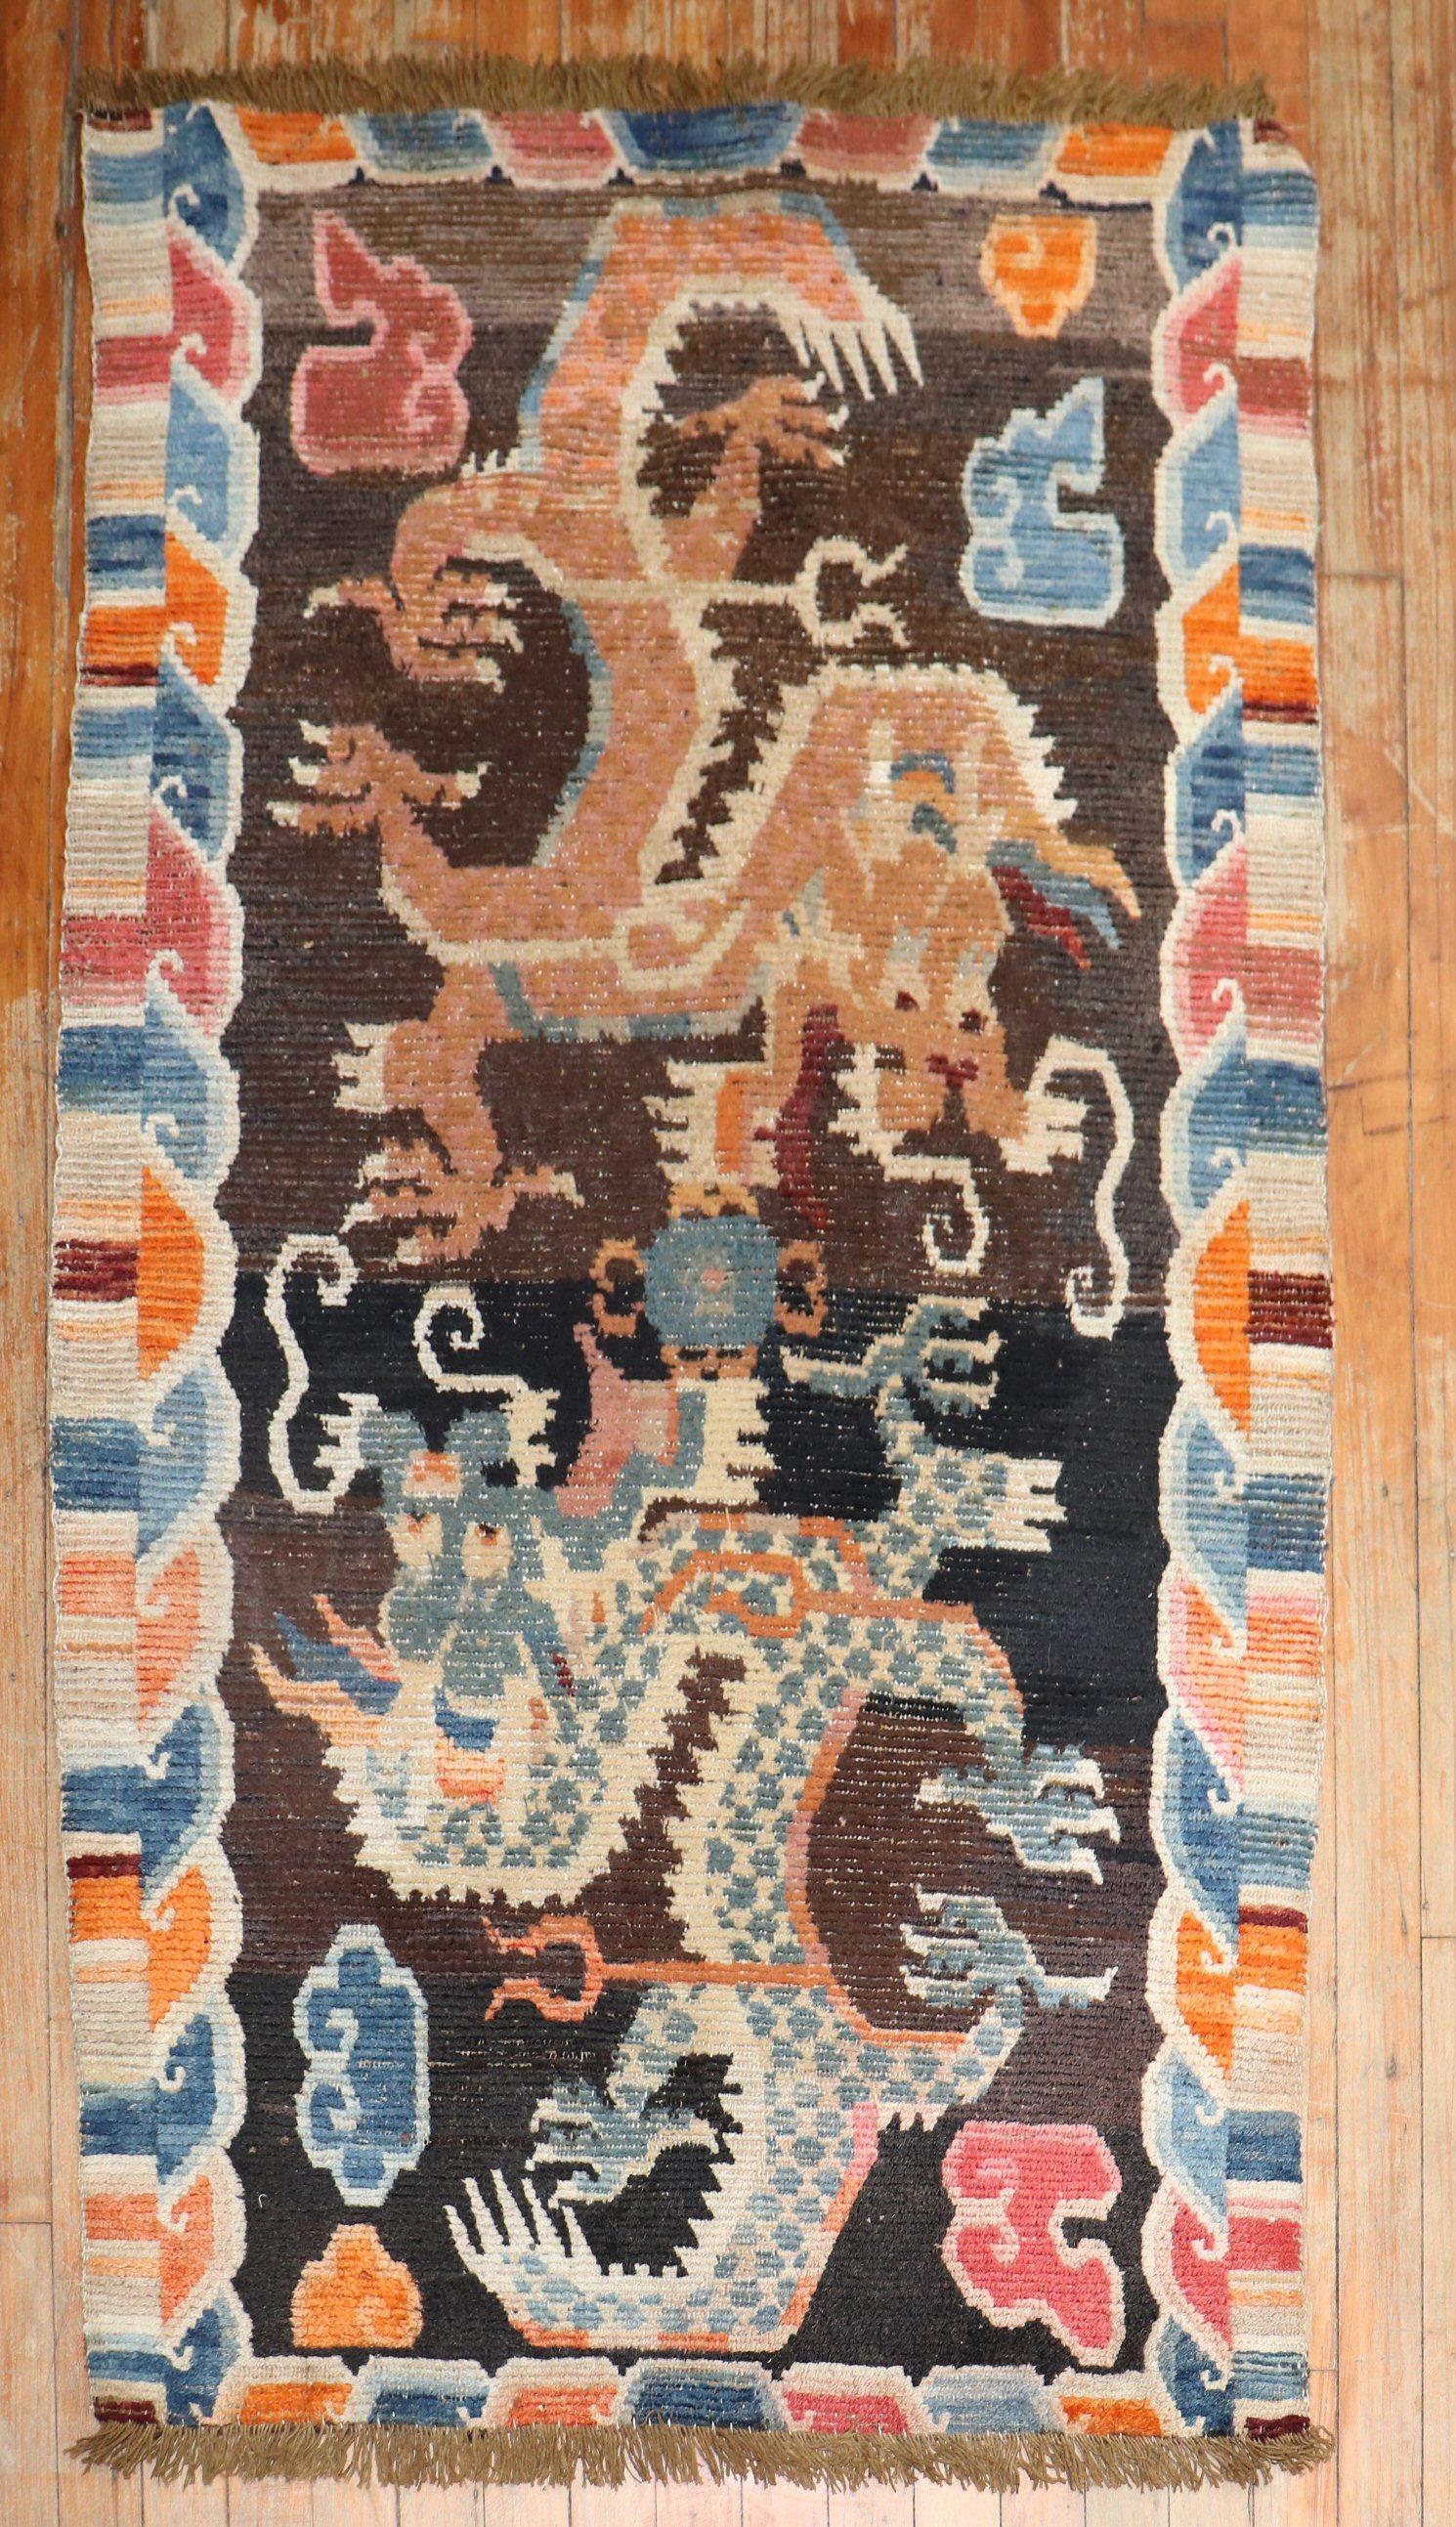 1st Quarter of the 20th century Tibetan rug with a large-scale dragon motif.
The wool is soft, Texture and patina are fabulous. Can also make for a suitable wall hanging.

Measures: 2'9